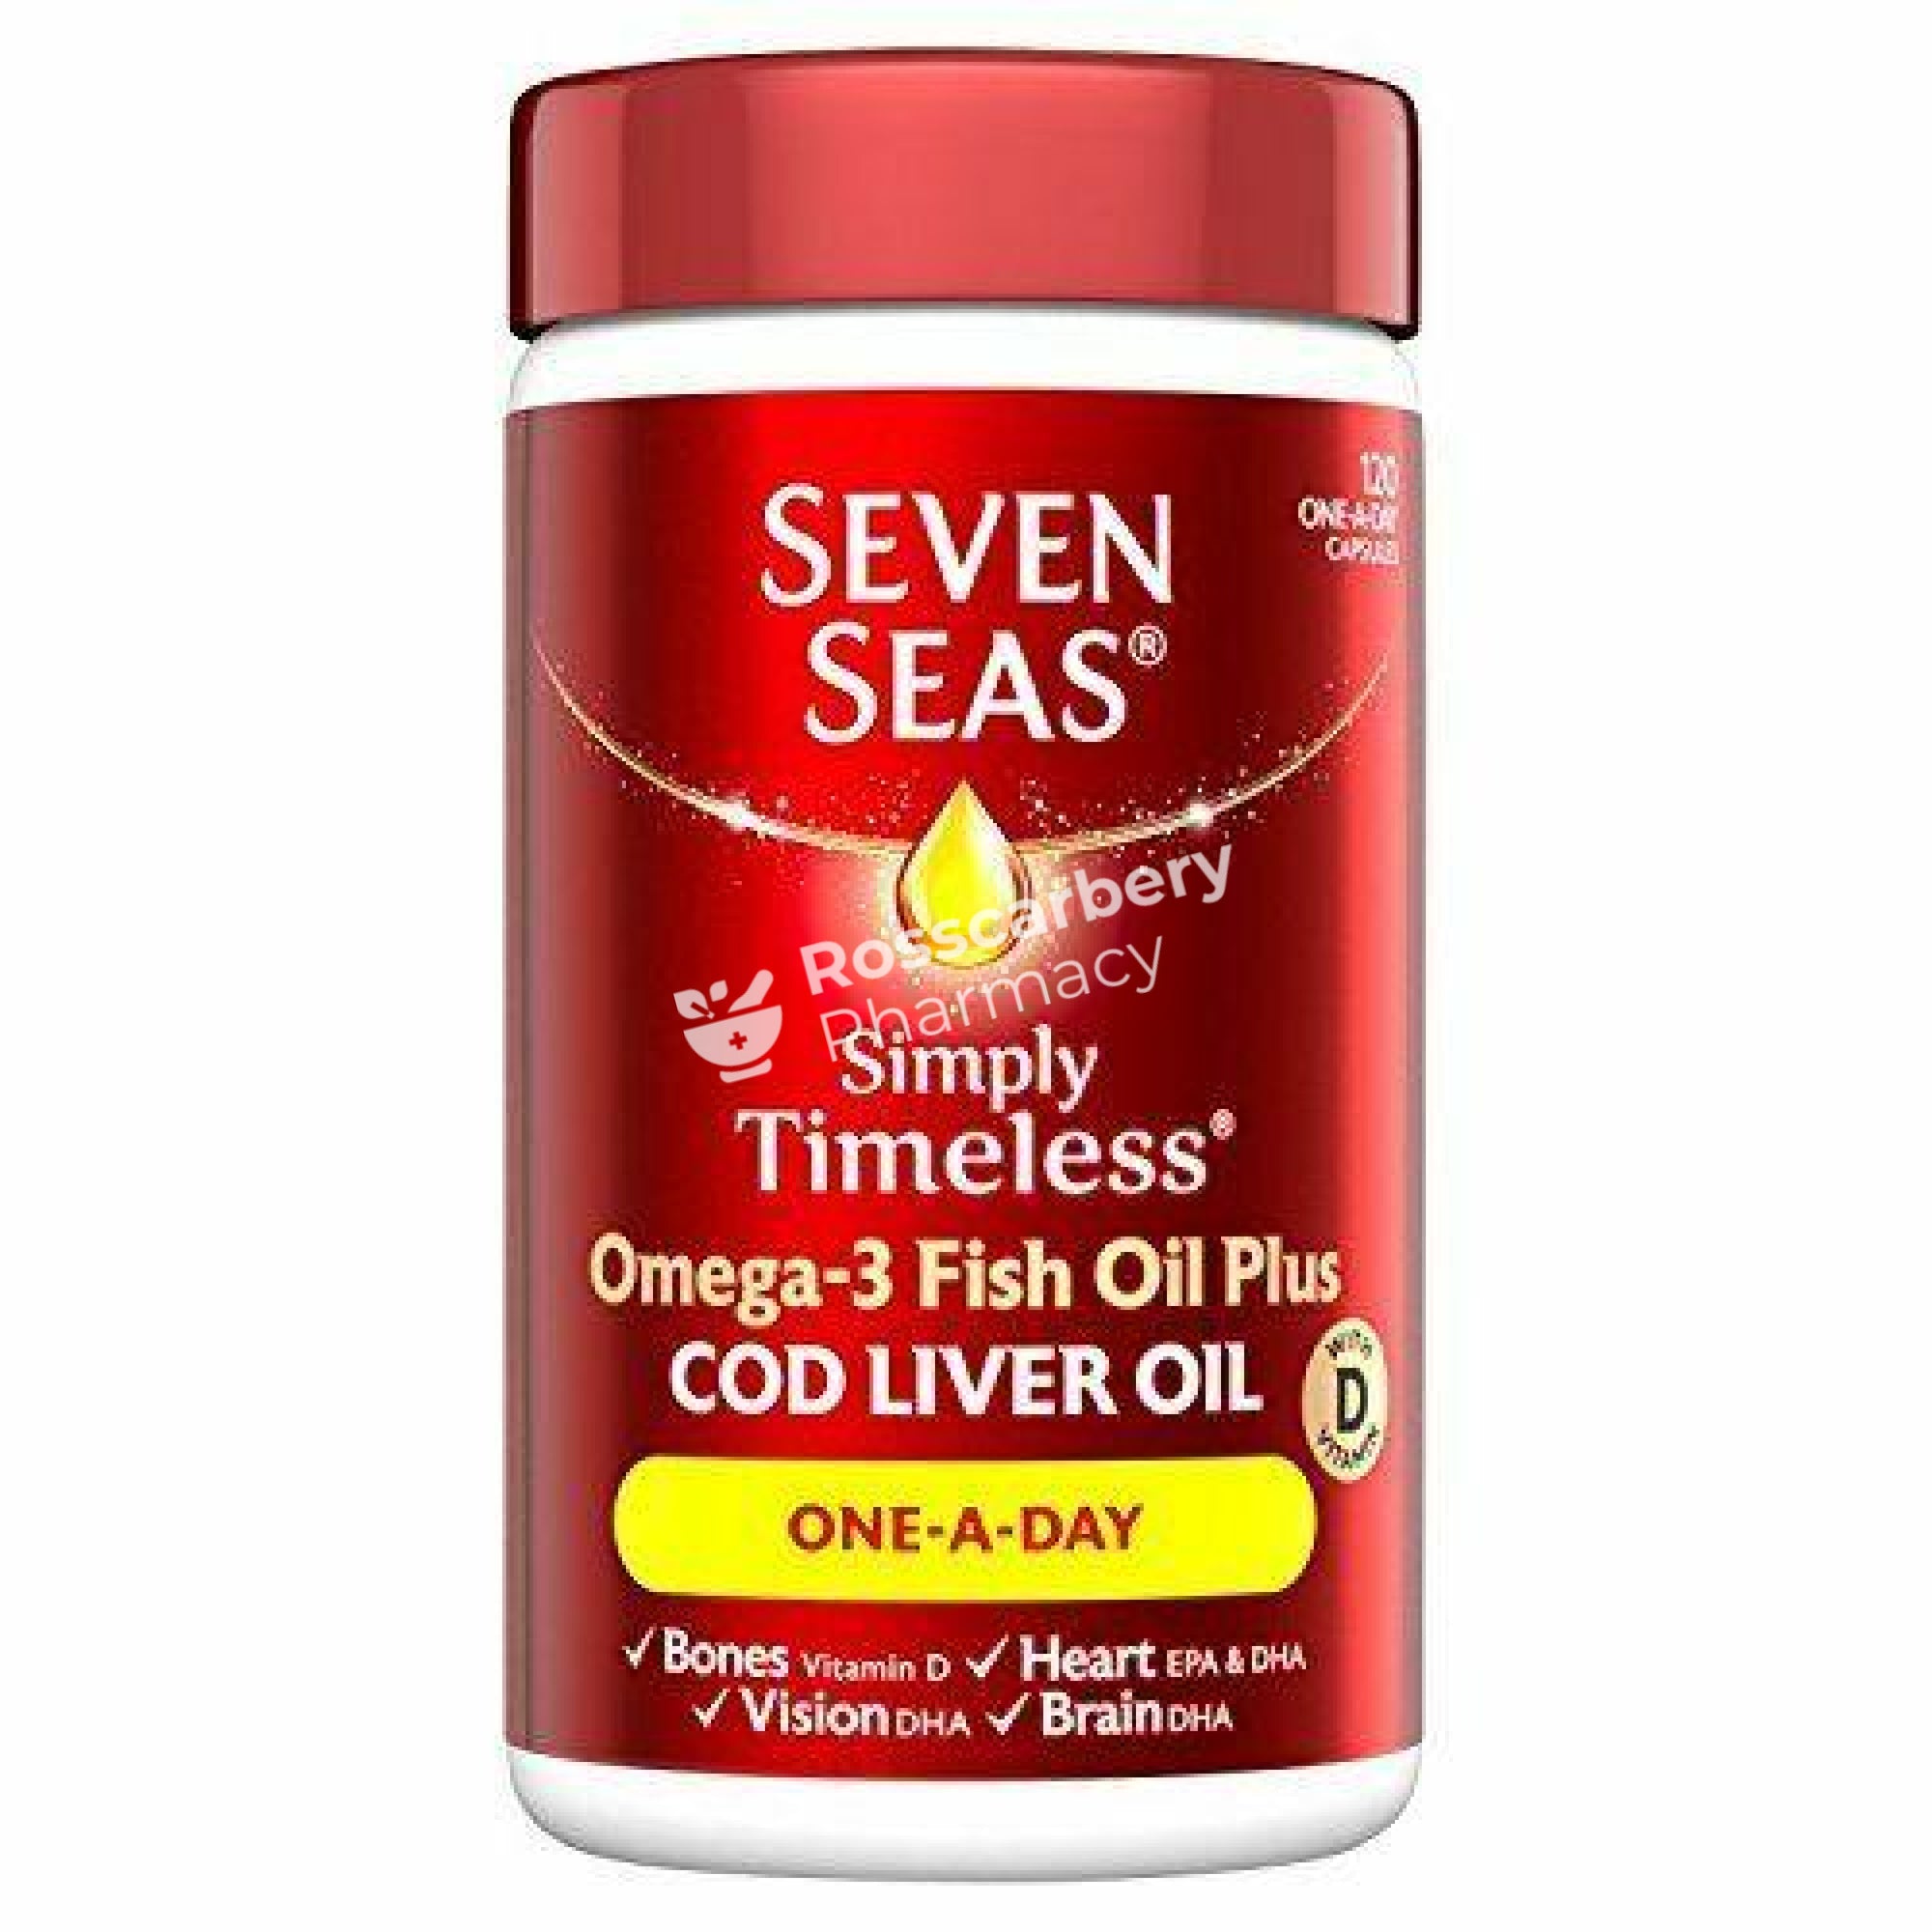 Seven Seas Cod Liver Oil Omega-3 Fish Plus One-A-Day Joint Muscle & Bone Health